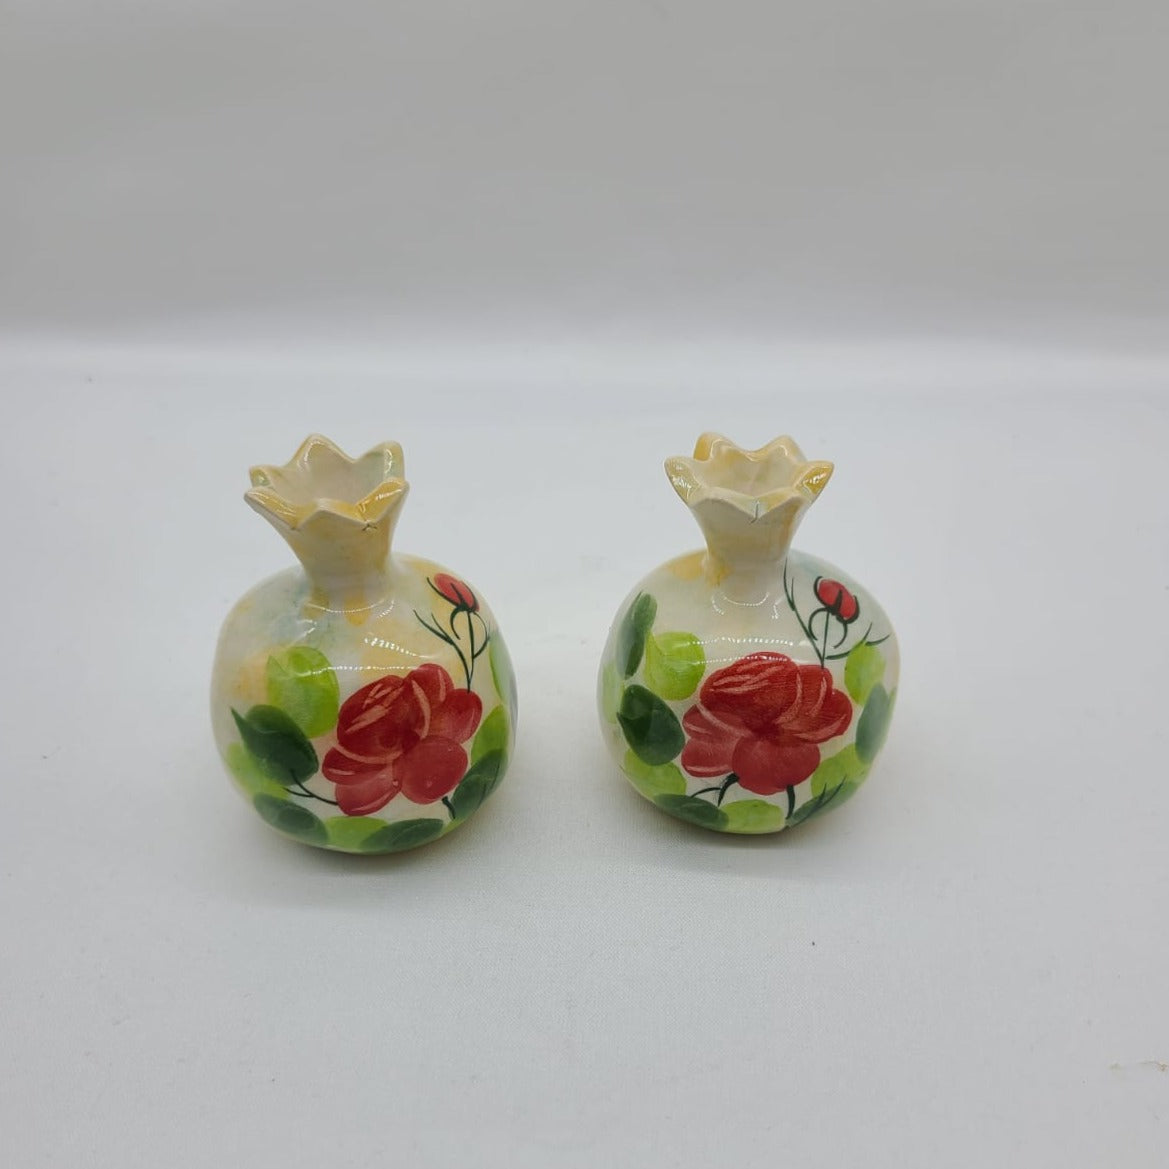 Red Rose Ceramic-Pomegranate Candle Holder - HighTouch 